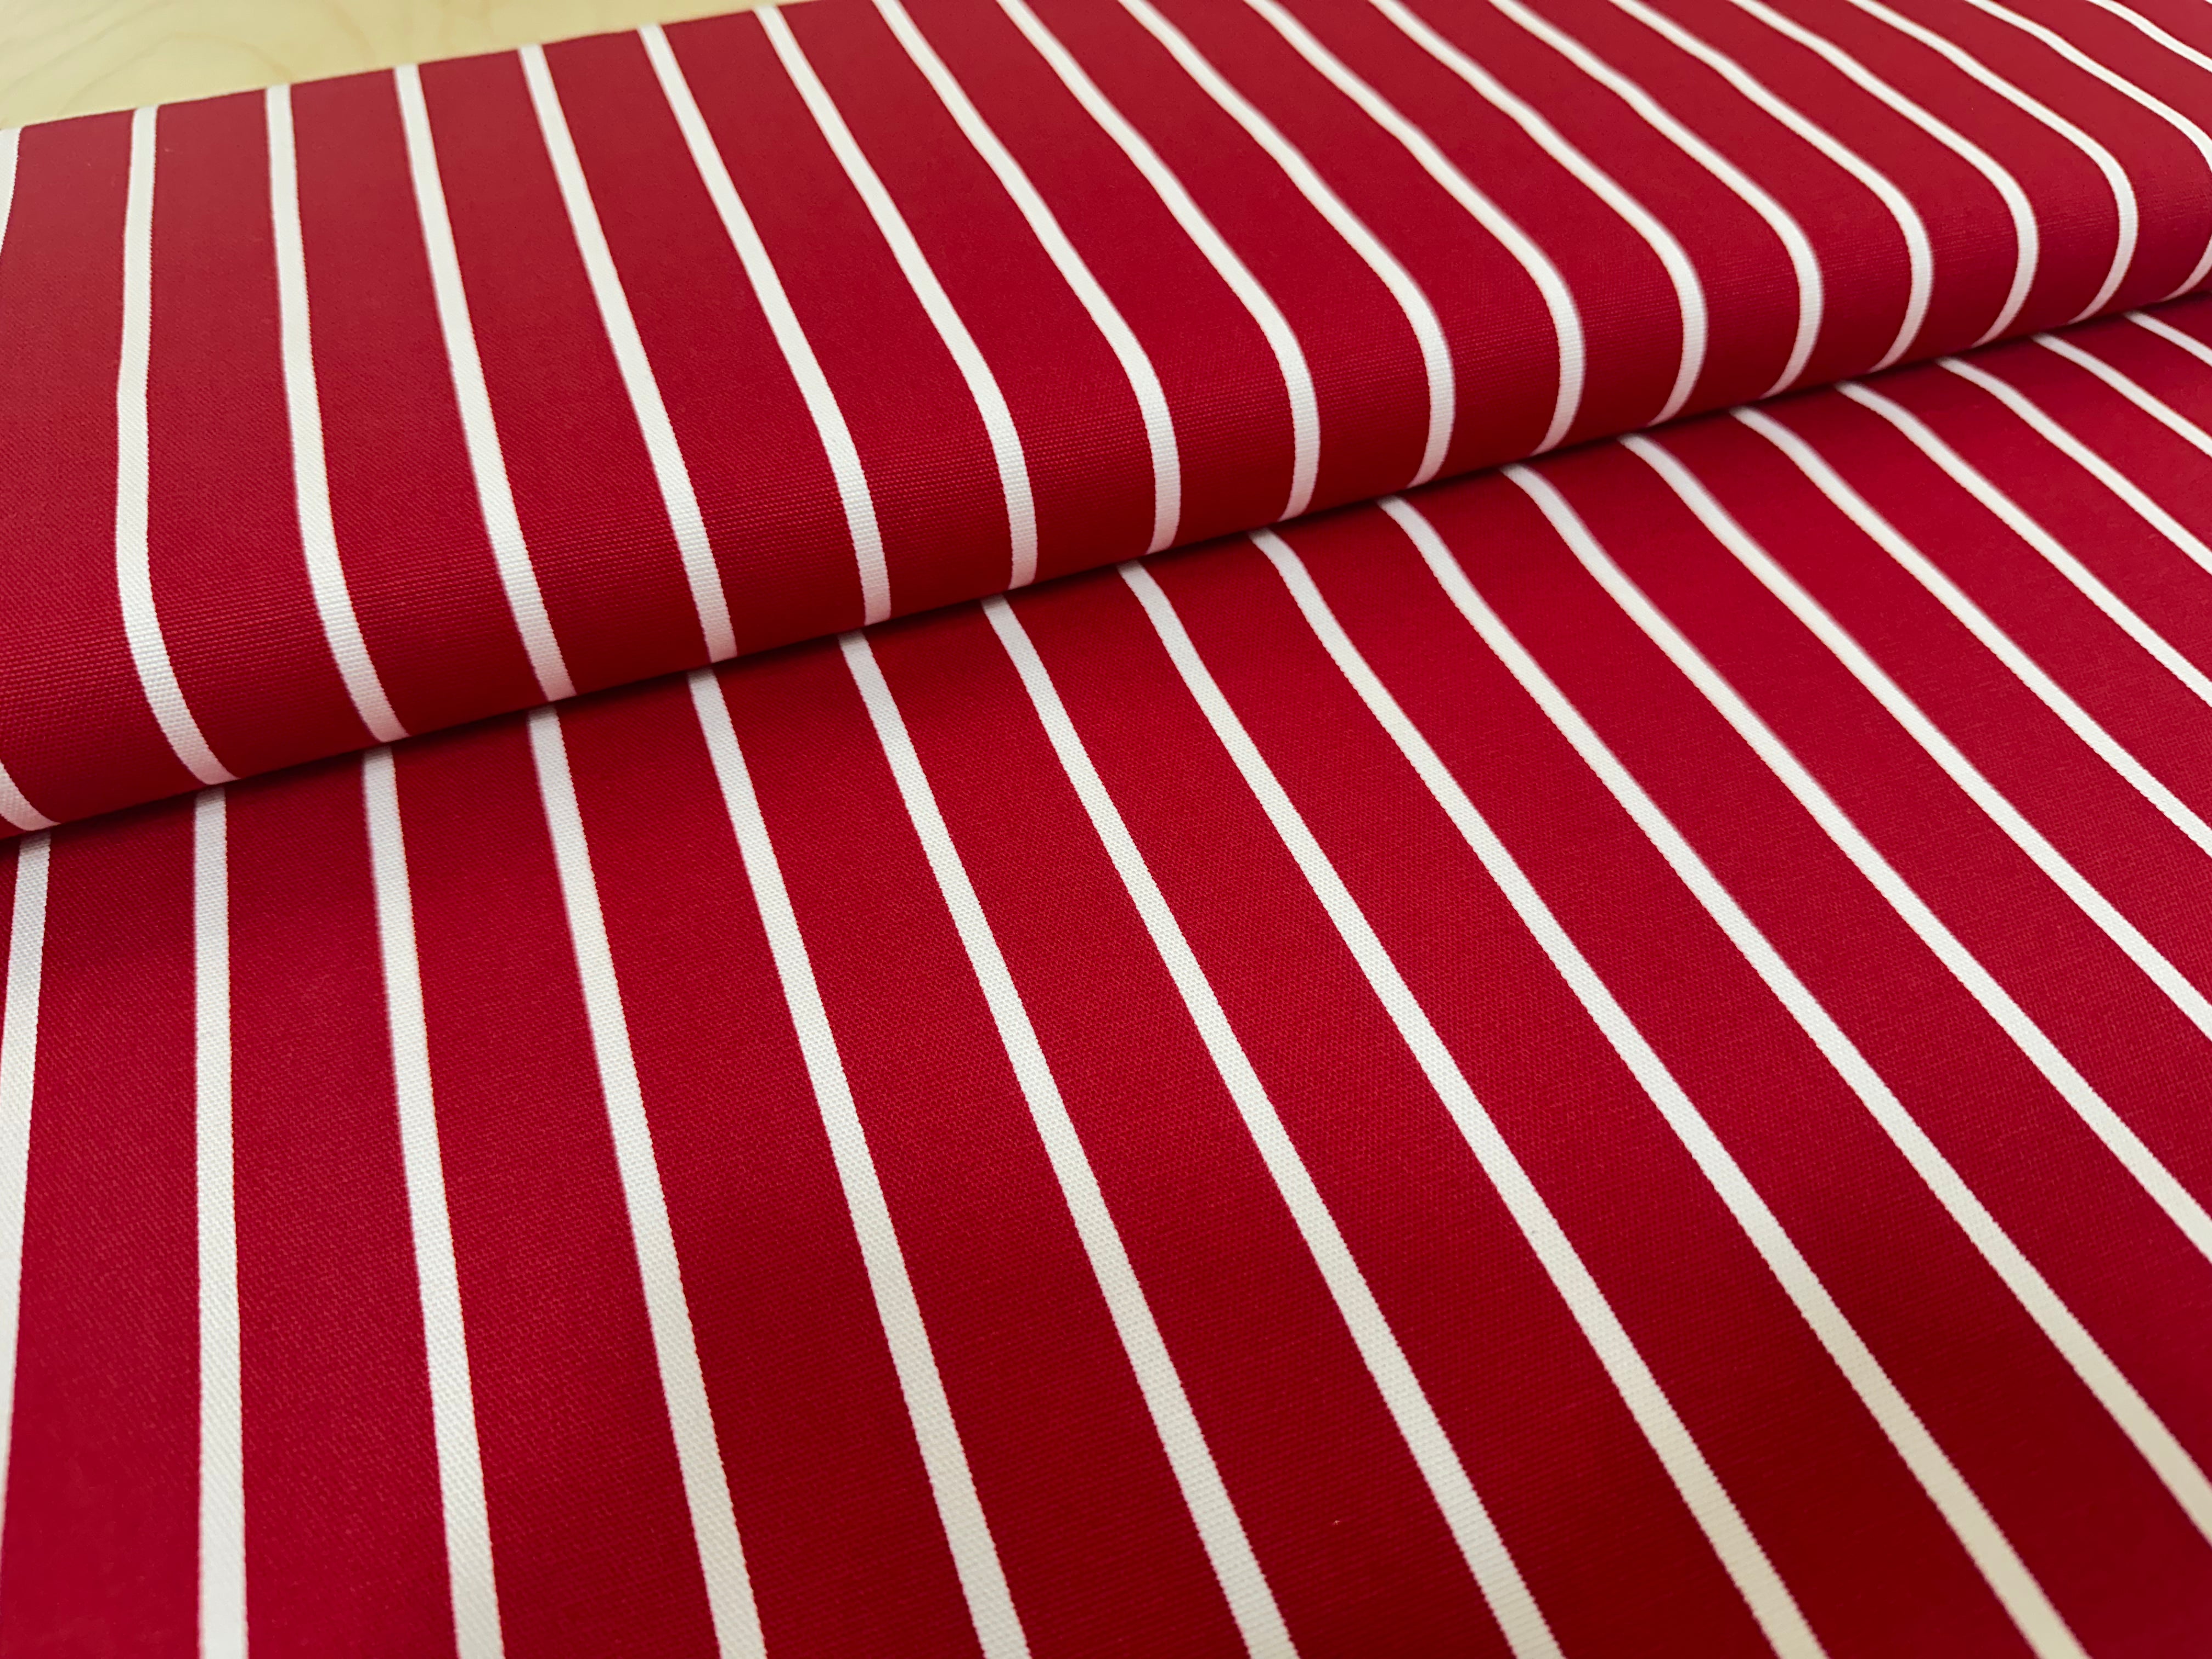 White Stripes on Red Cotton Canvas